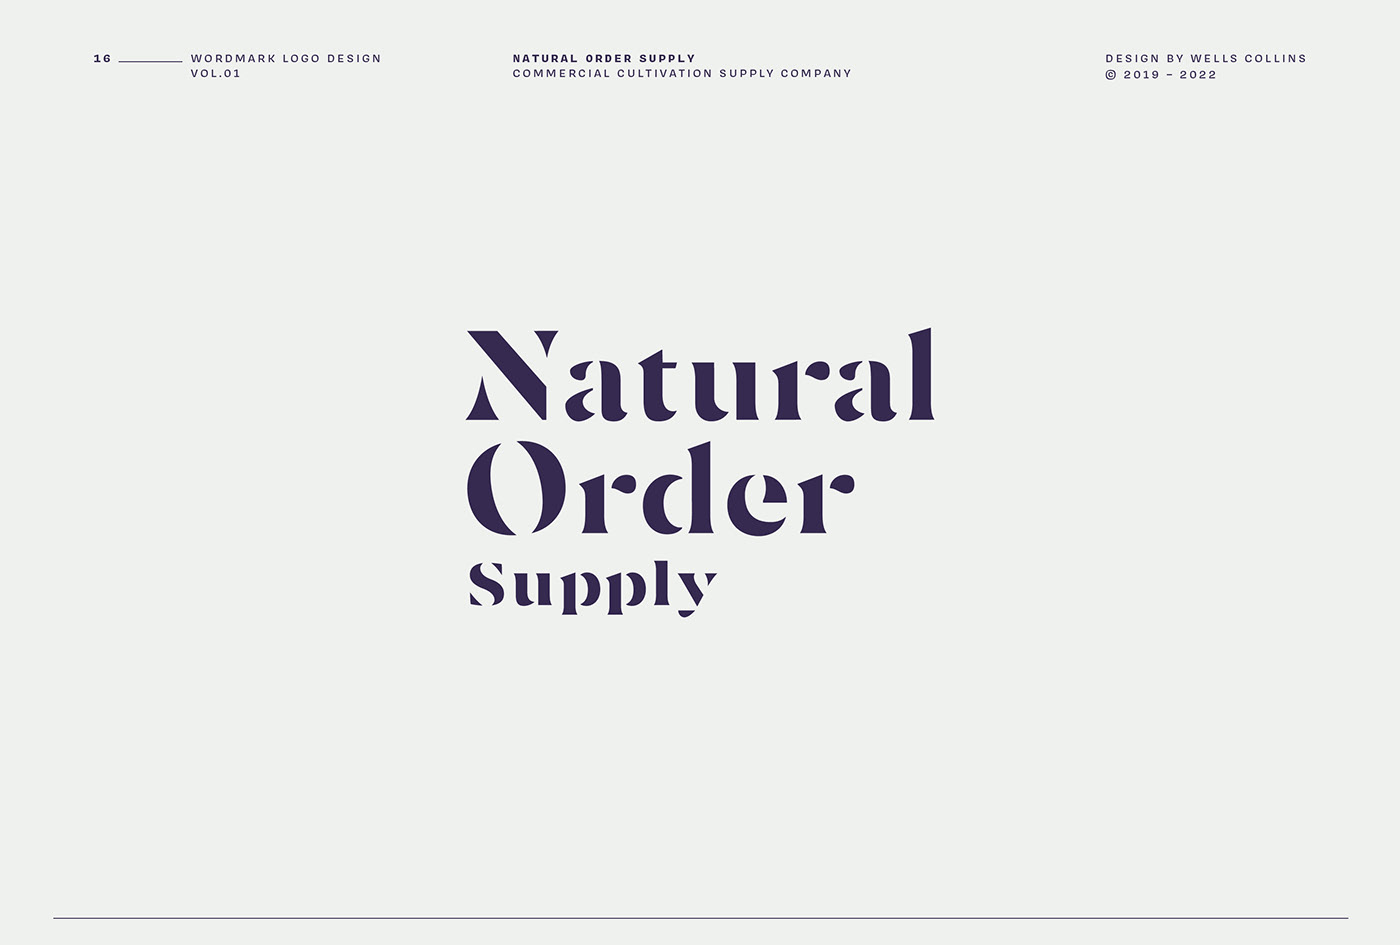 Stencil logotype design for Natural Order Supply